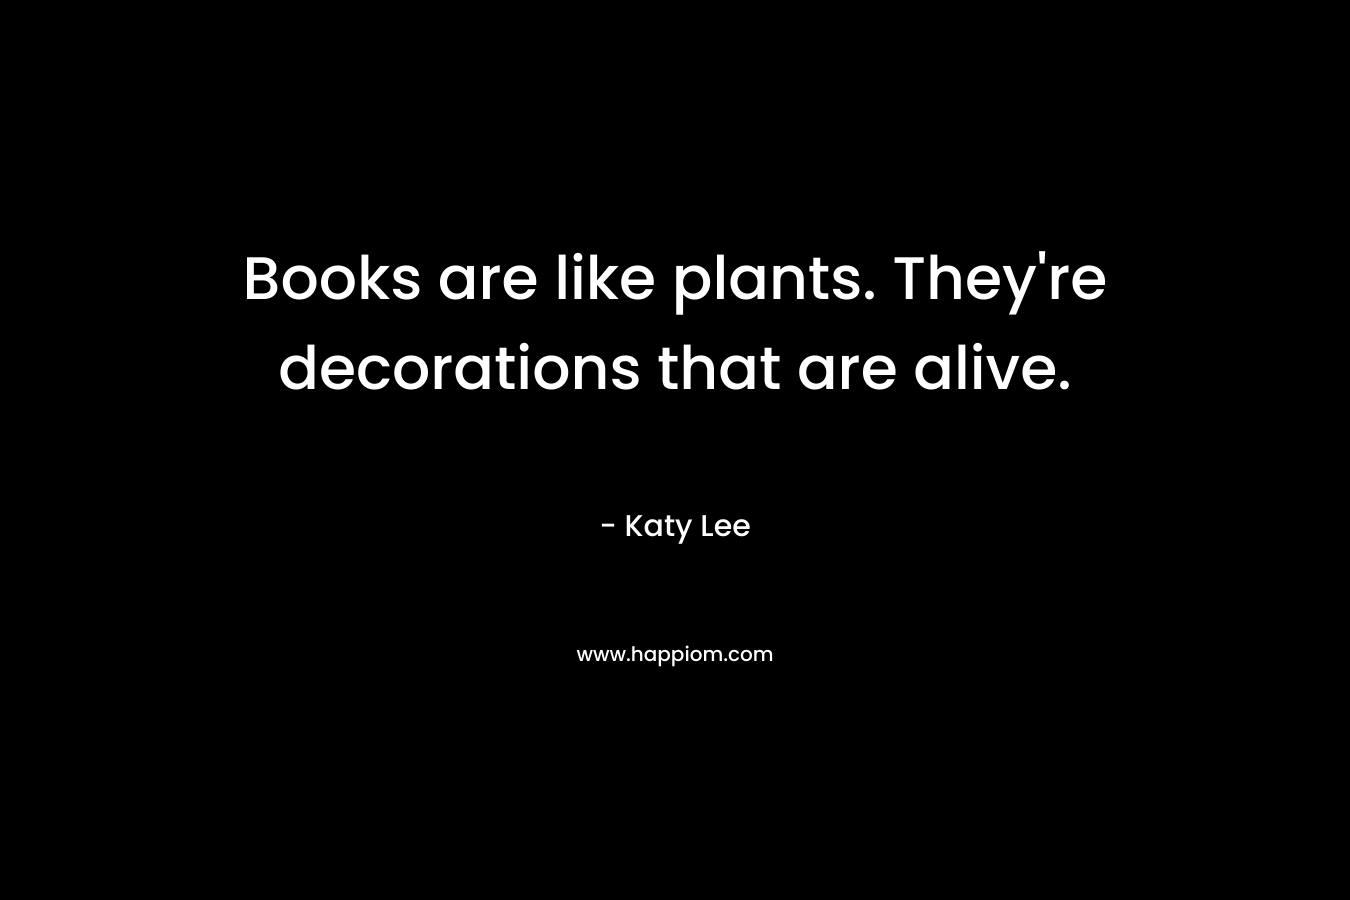 Books are like plants. They’re decorations that are alive. – Katy Lee